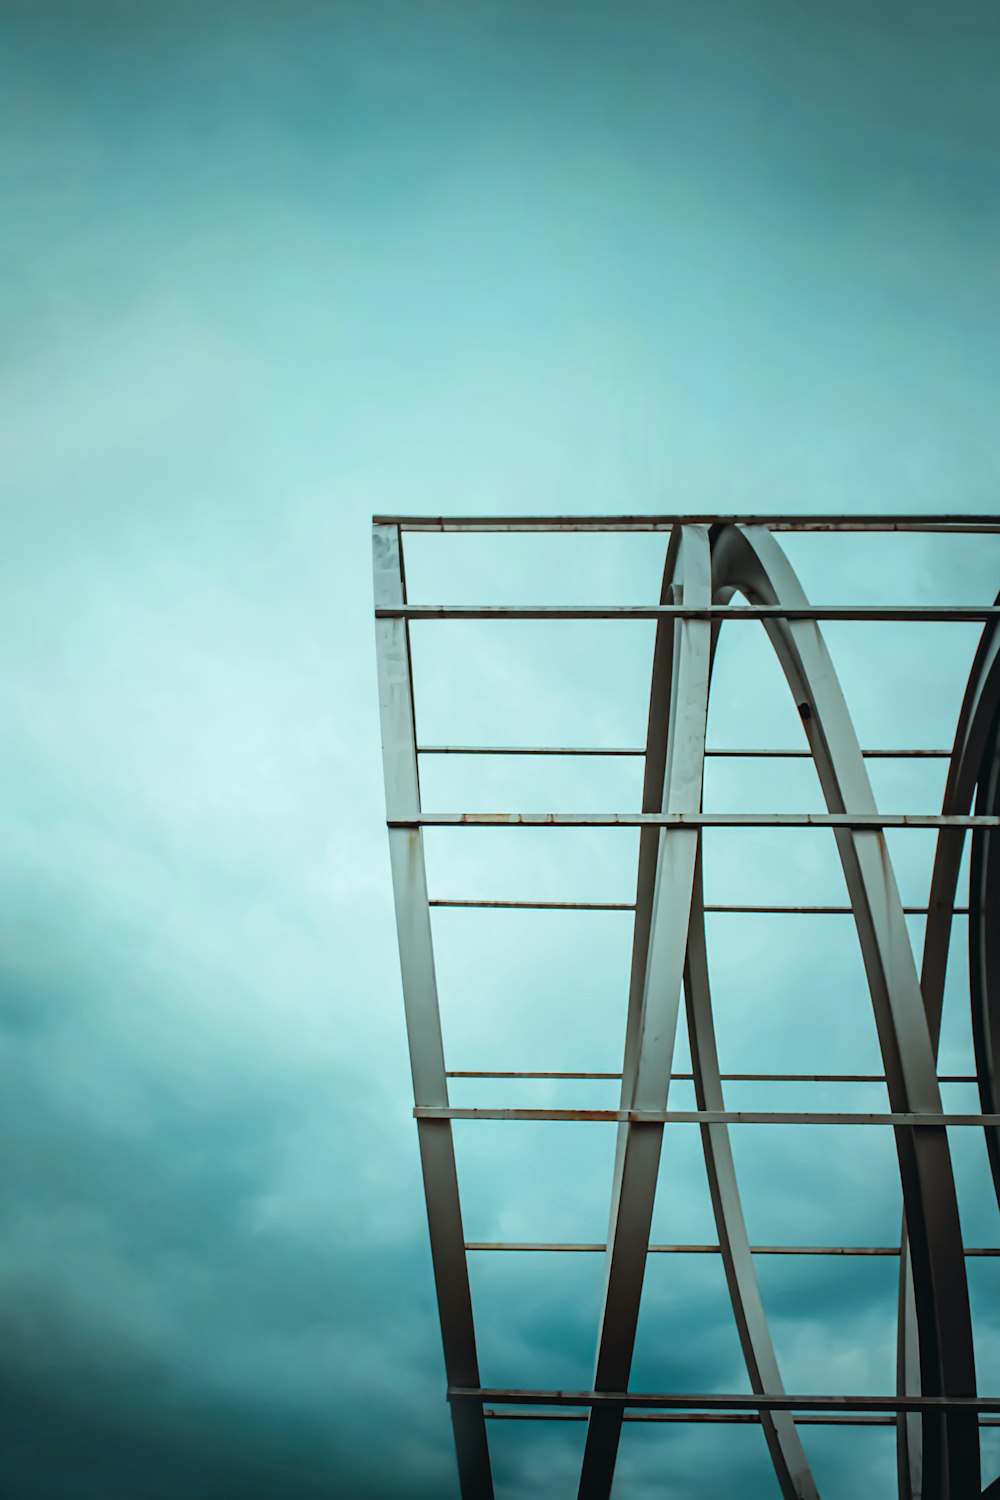 a tall metal structure with a sky in the background